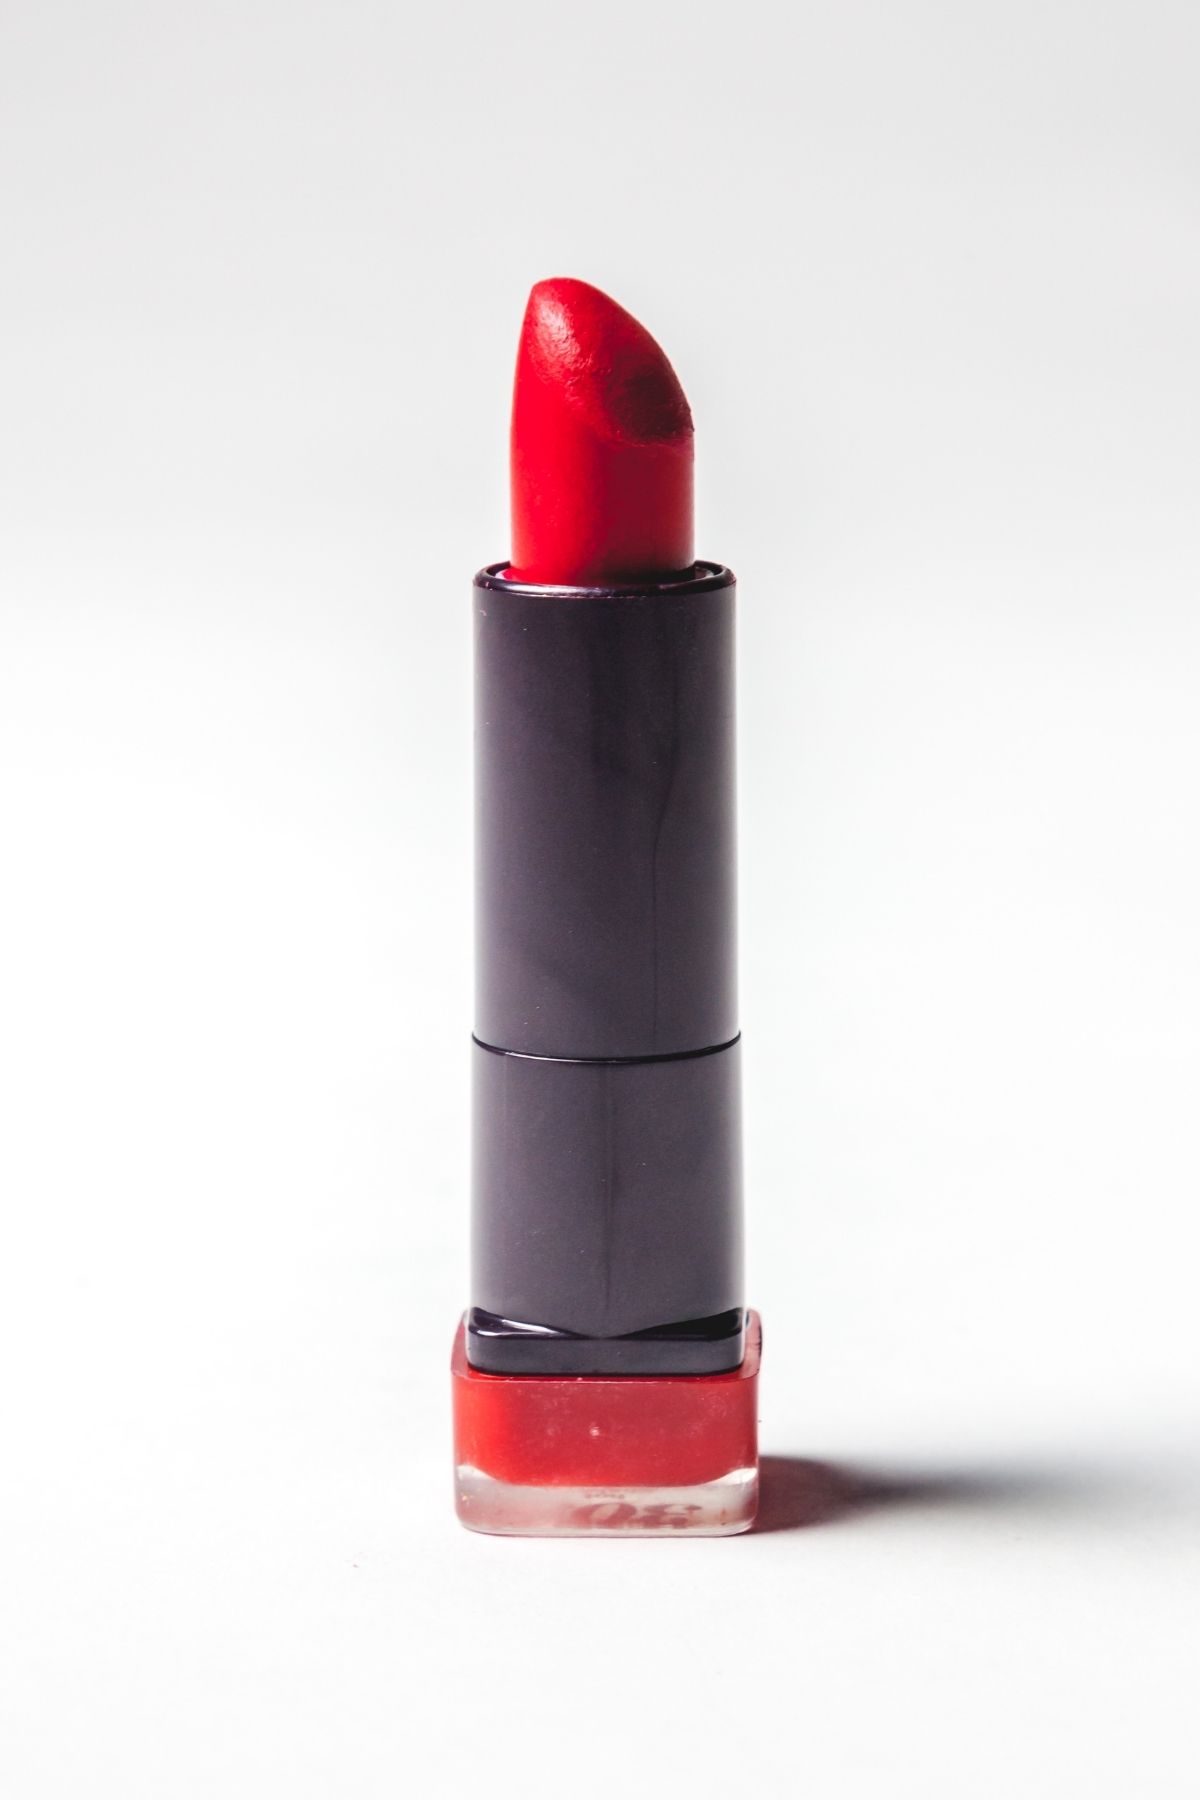 Red lipstick in a black tube in front of a white background.